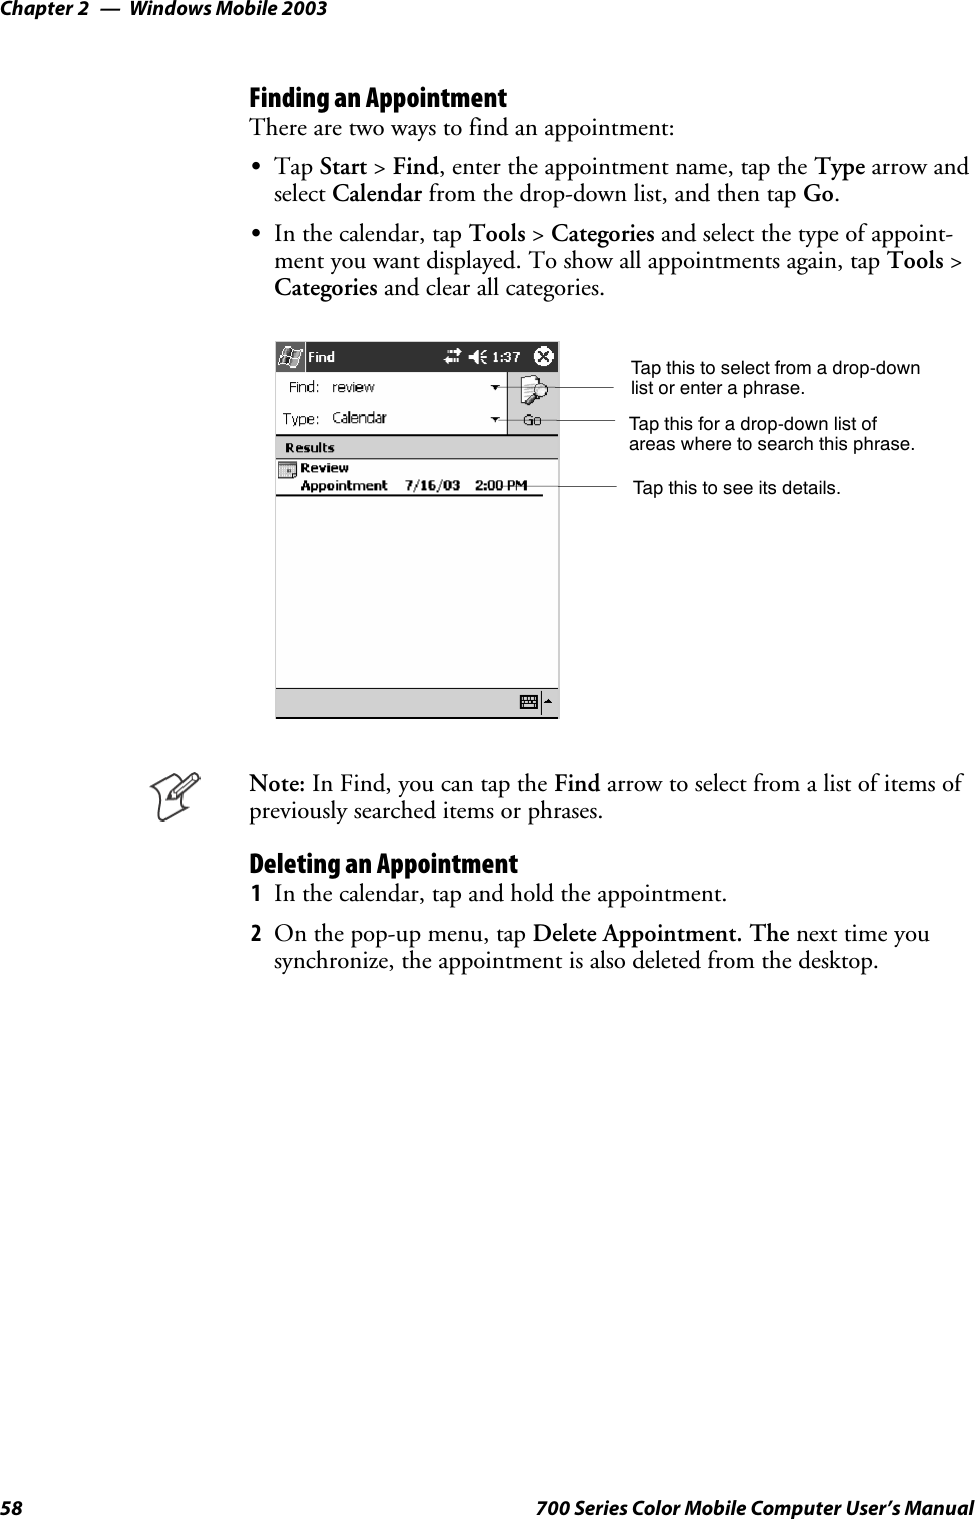 Windows Mobile 2003Chapter —258 700 Series Color Mobile Computer User’s ManualFinding an AppointmentThere are two ways to find an appointment:STap Start &gt;Find, enter the appointment name, tap the Type arrow andselect Calendar from the drop-down list, and then tap Go.SIn the calendar, tap Tools &gt;Categories and select the type of appoint-ment you want displayed. To show all appointments again, tap Tools &gt;Categories and clear all categories.Tap this to select from a drop-downlist or enter a phrase.Tap this for a drop-down list ofareas where to search this phrase.Tap this to see its details.Note: In Find, you can tap the Find arrow to select from a list of items ofpreviously searched items or phrases.Deleting an Appointment1In the calendar, tap and hold the appointment.2On the pop-up menu, tap Delete Appointment. The next time yousynchronize, the appointment is also deleted from the desktop.